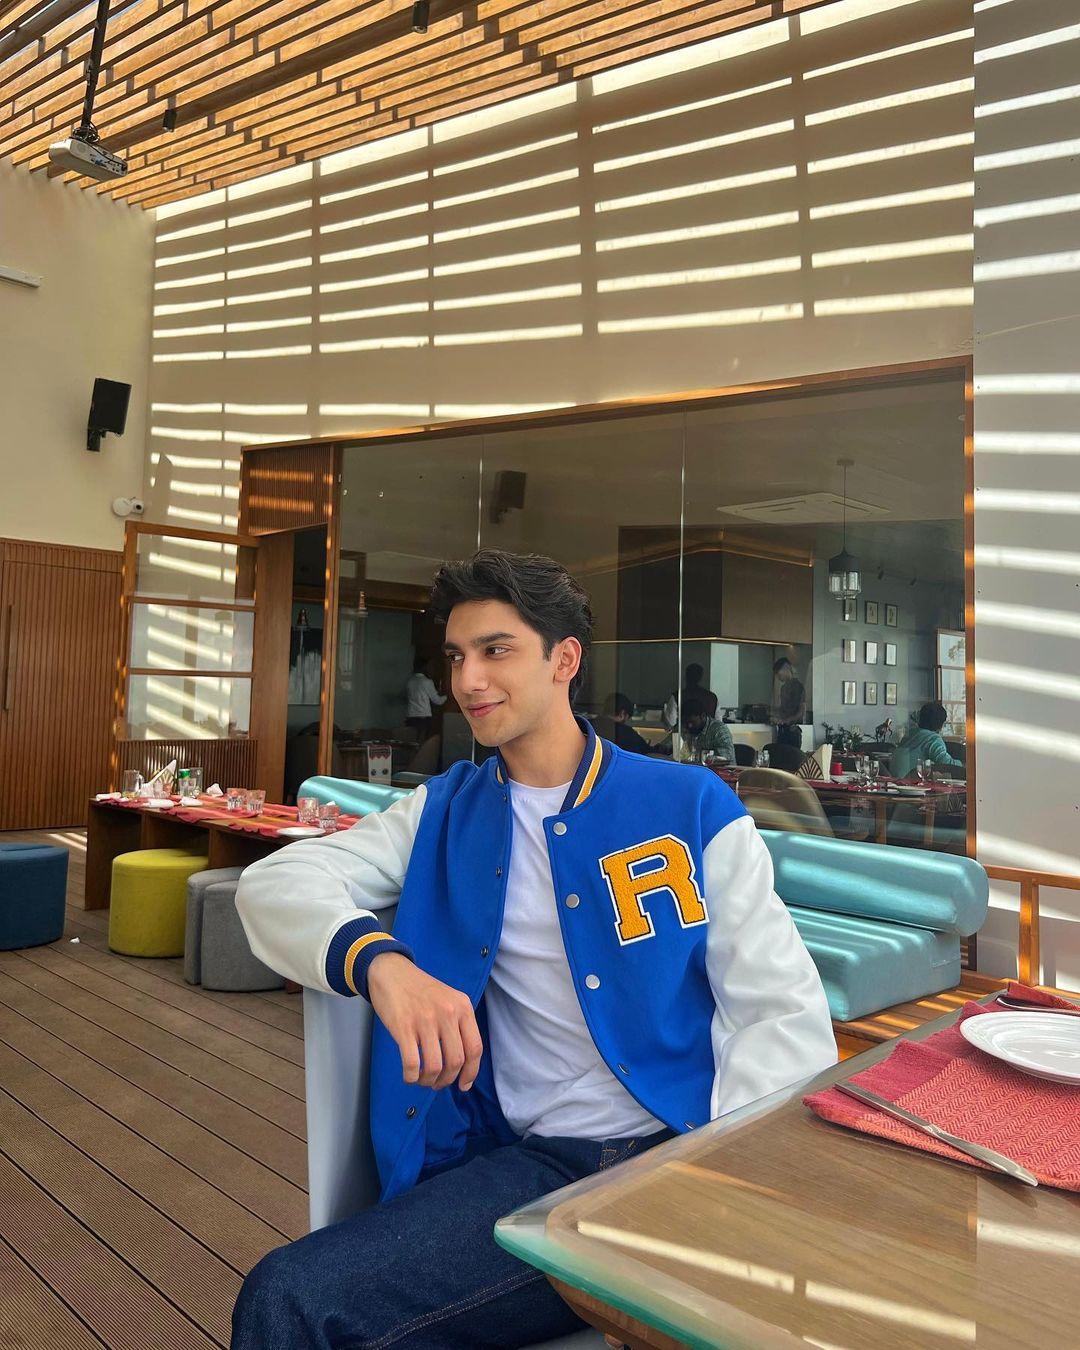 Sticking with a relaxed vibe, Vedang demonstrates how a varsity jacket can instantly elevate any outfit and make it ten times more stylish.